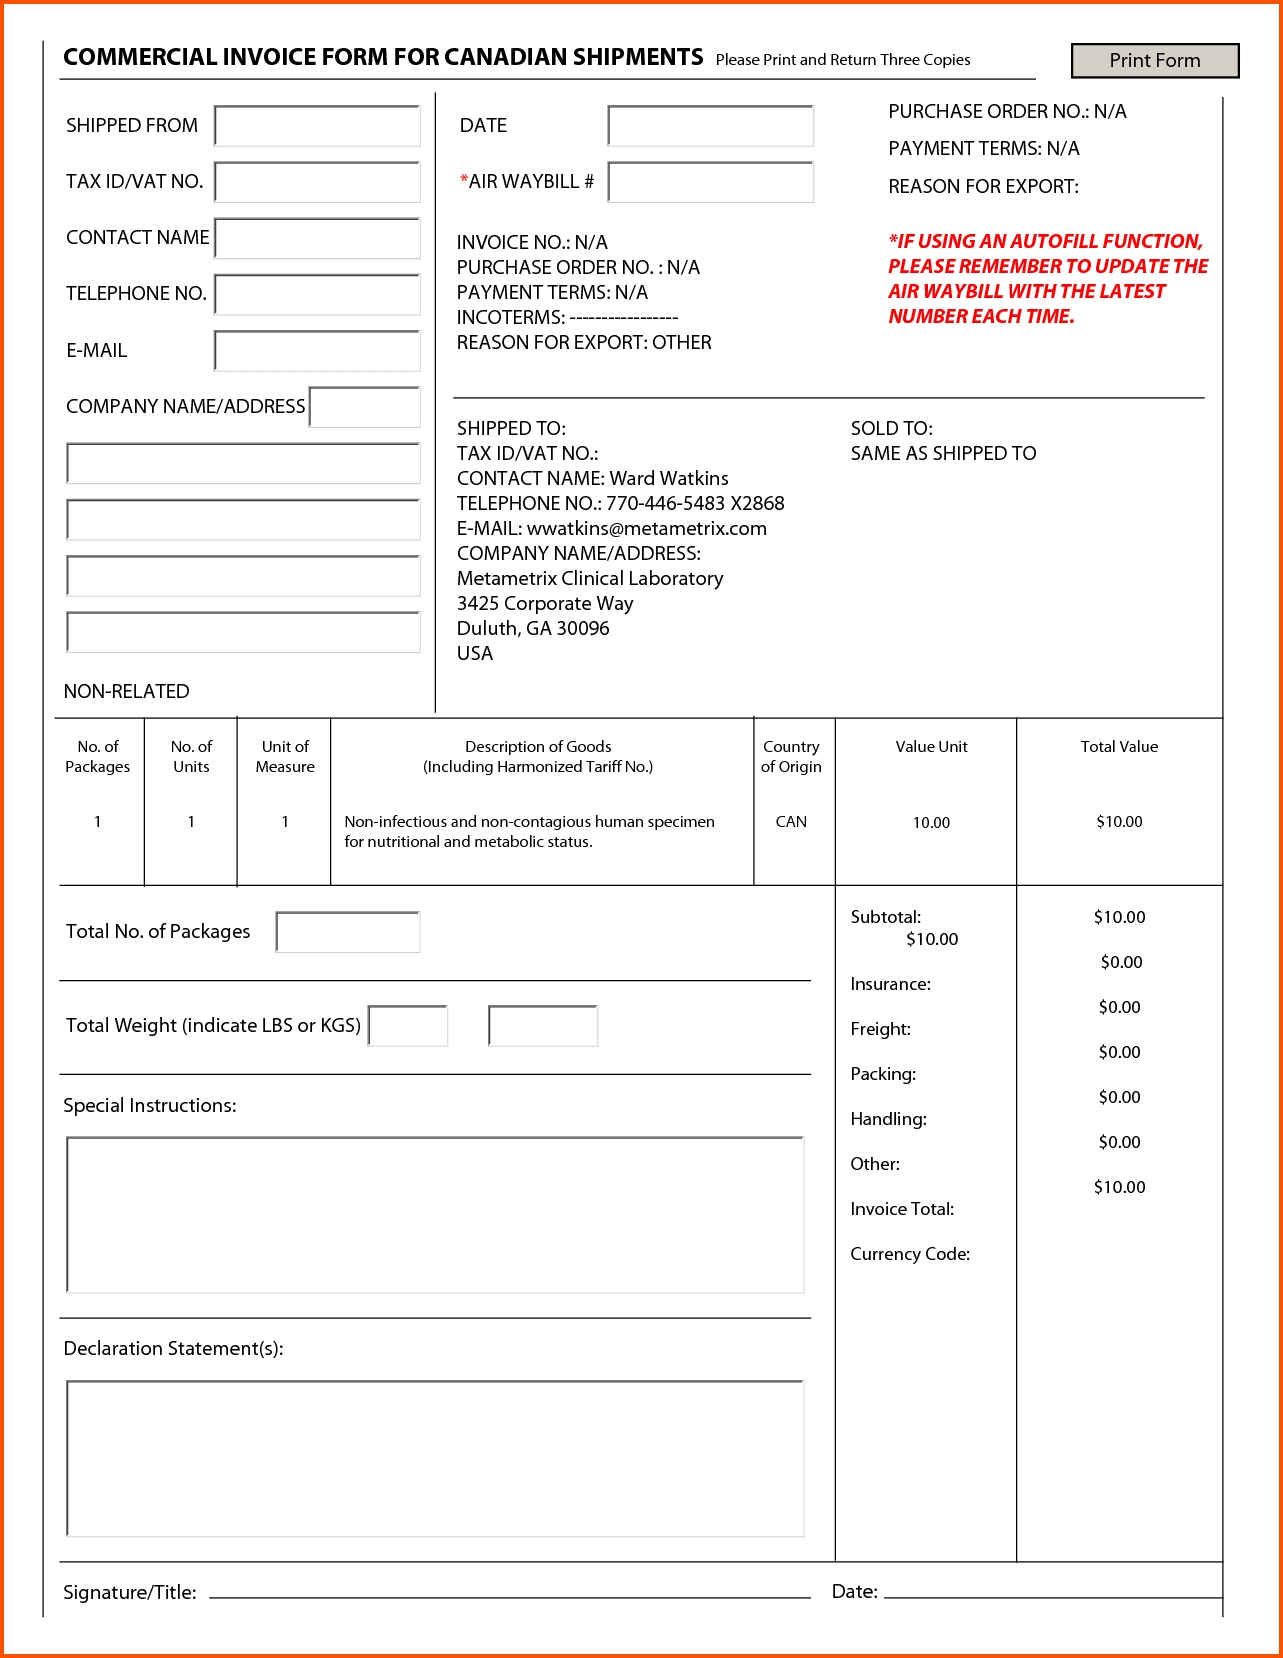 12 commercial invoice form survey template words nafta commercial invoice